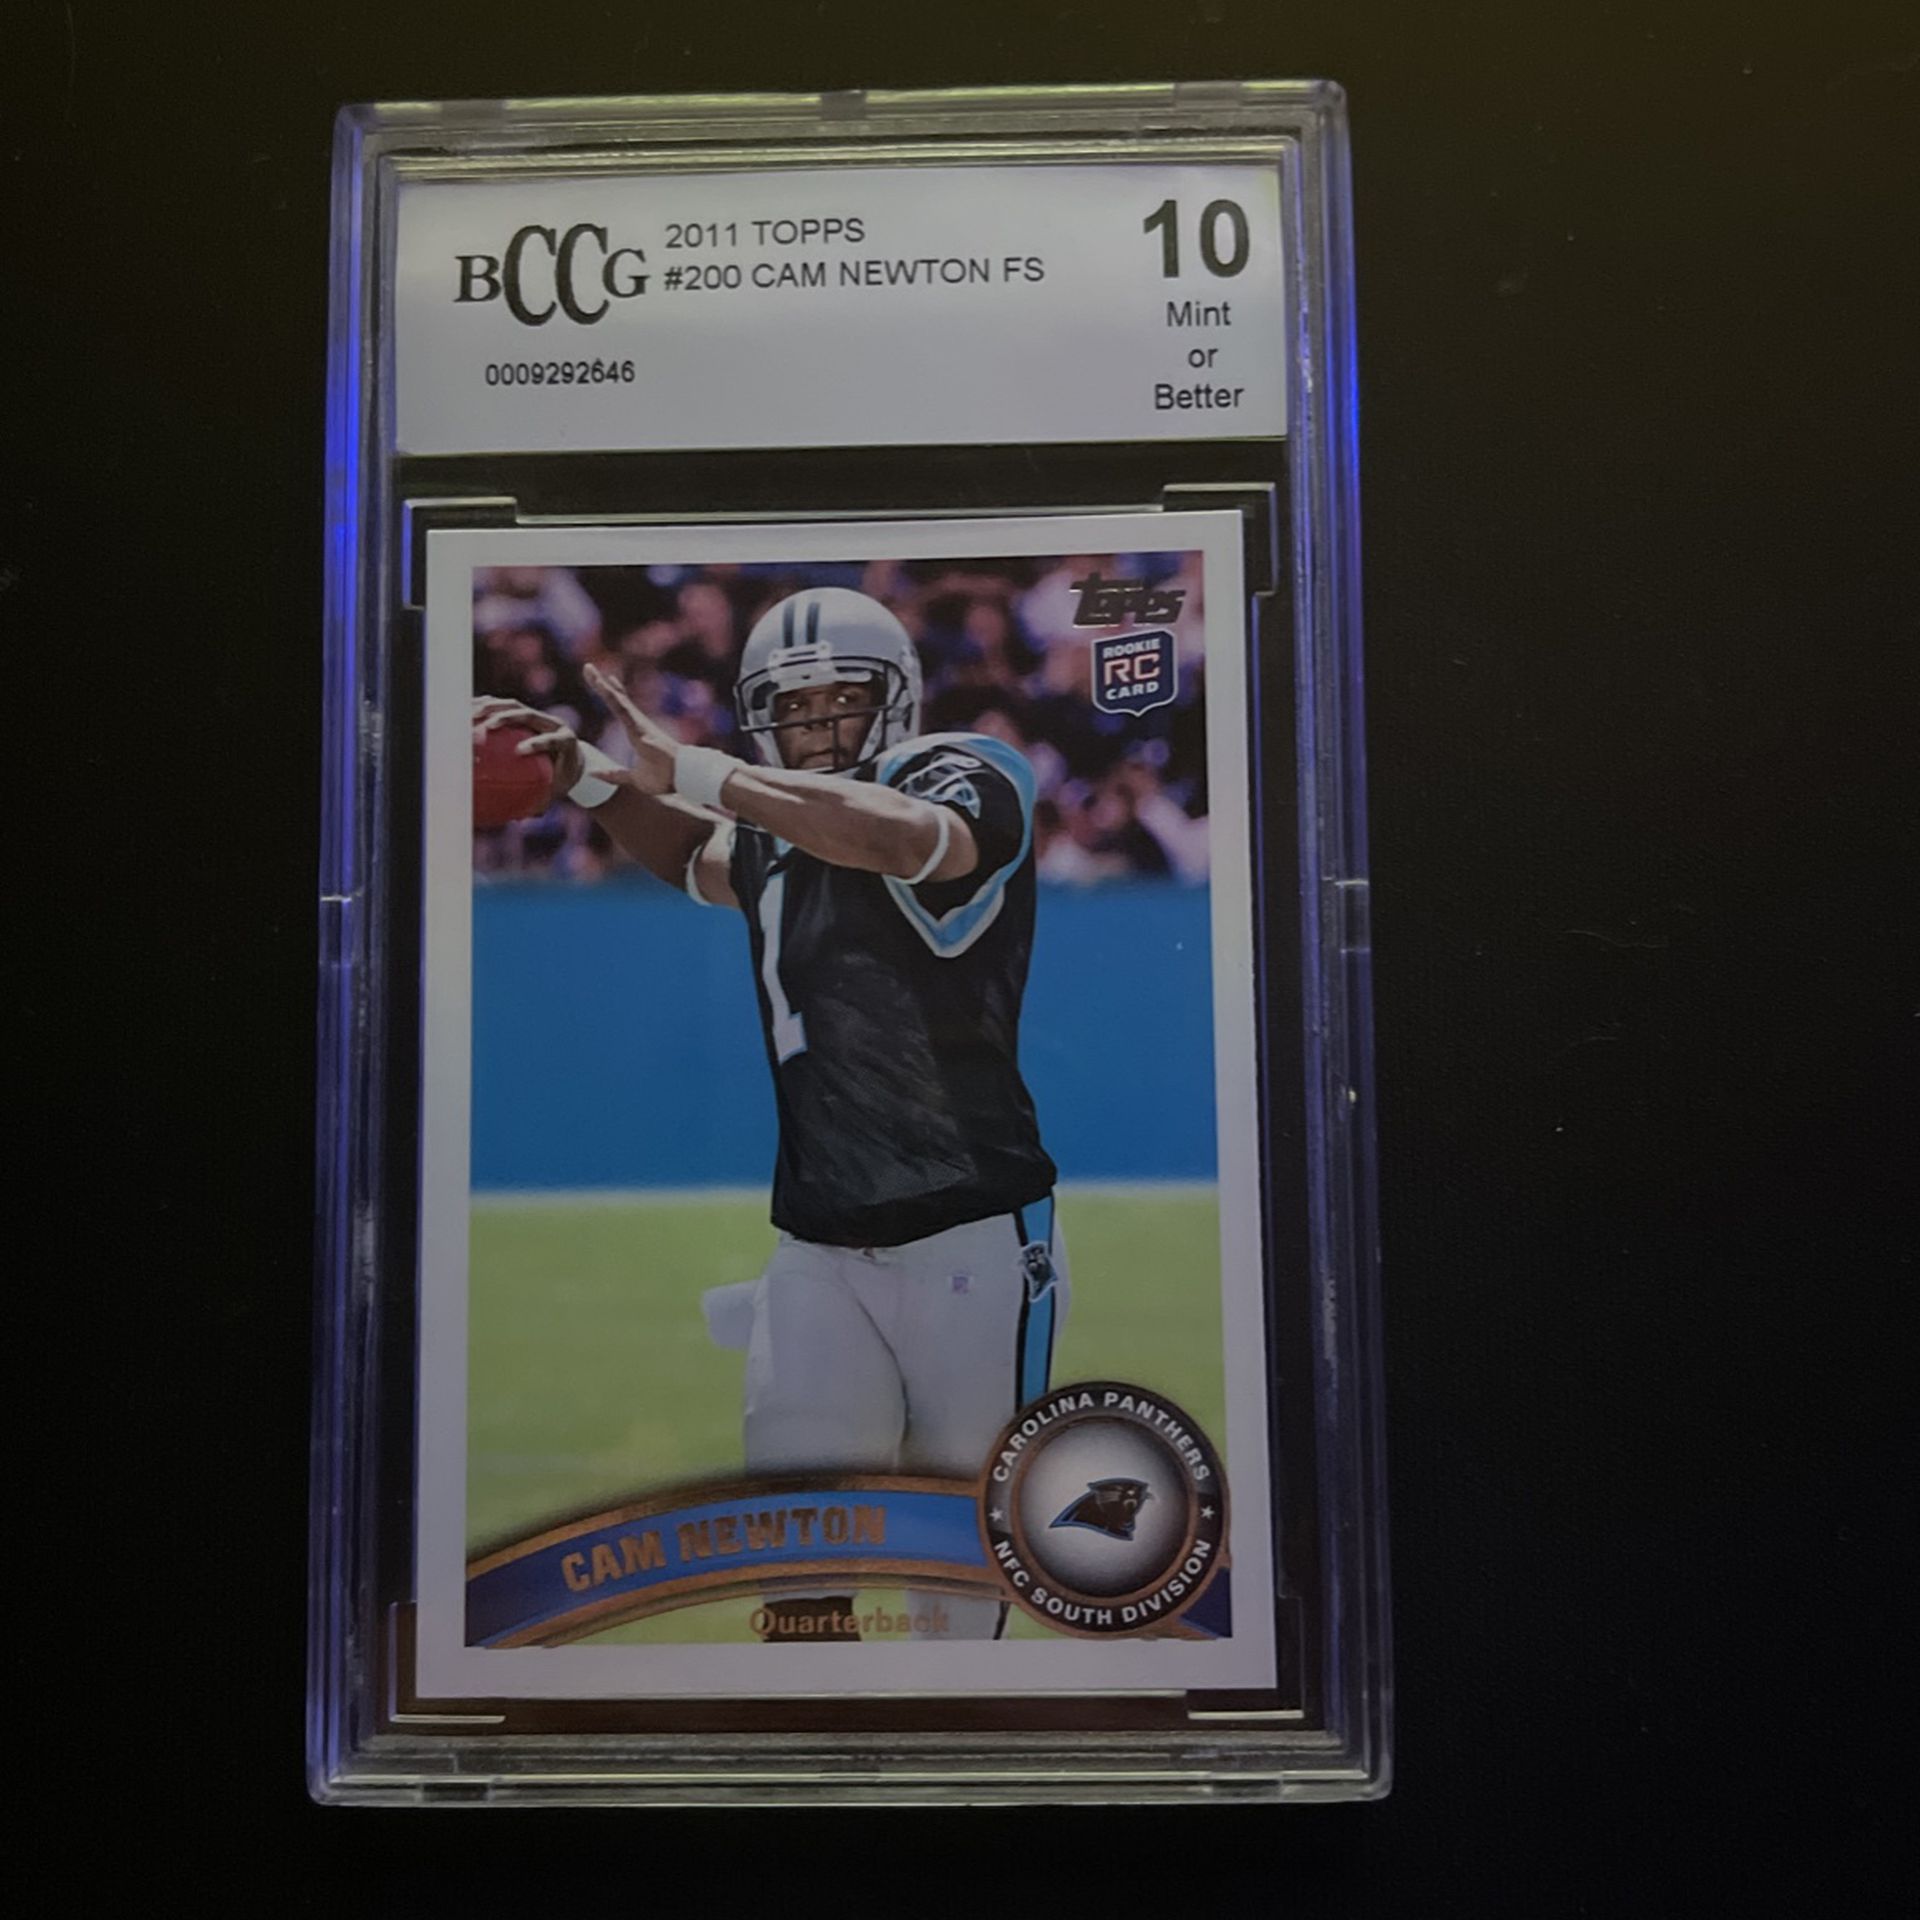 Rookie Cam Newton topps card